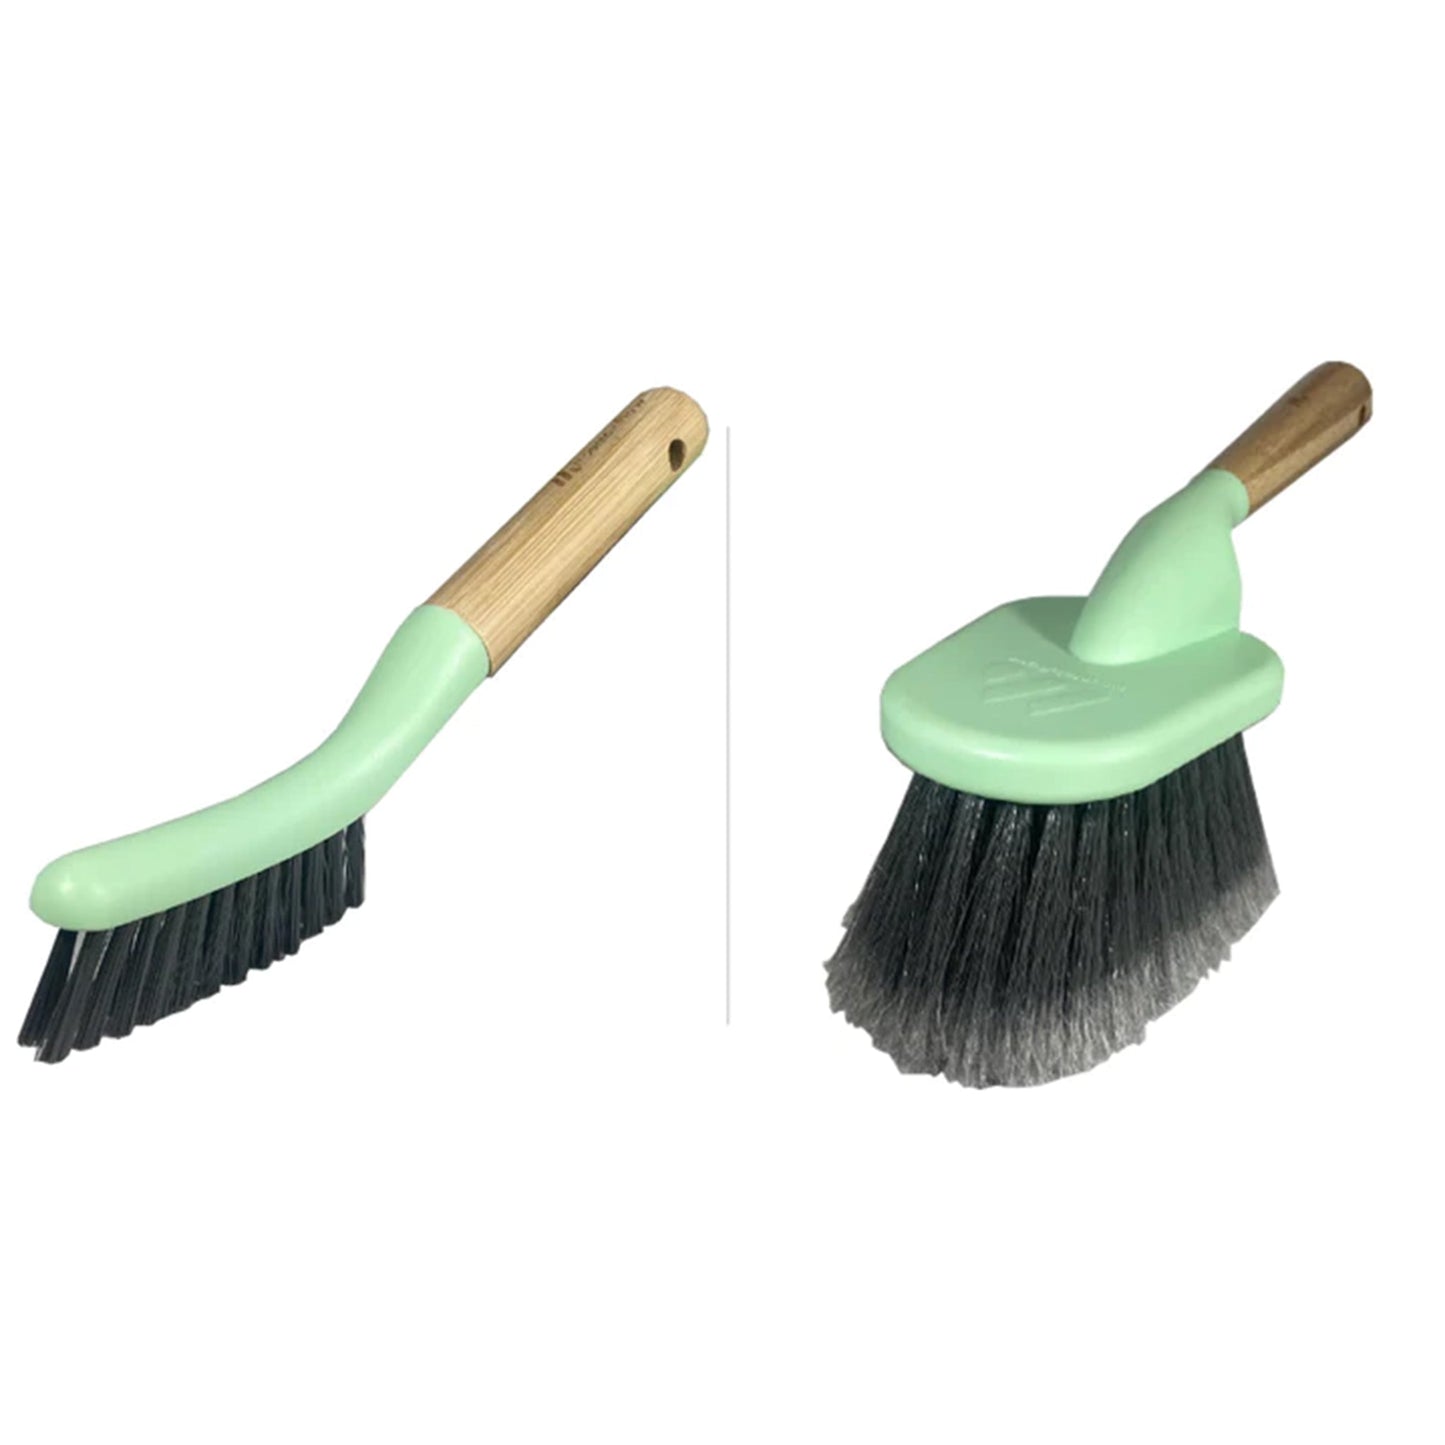 mountainFLOW Bamboo Cleaning Brush Set